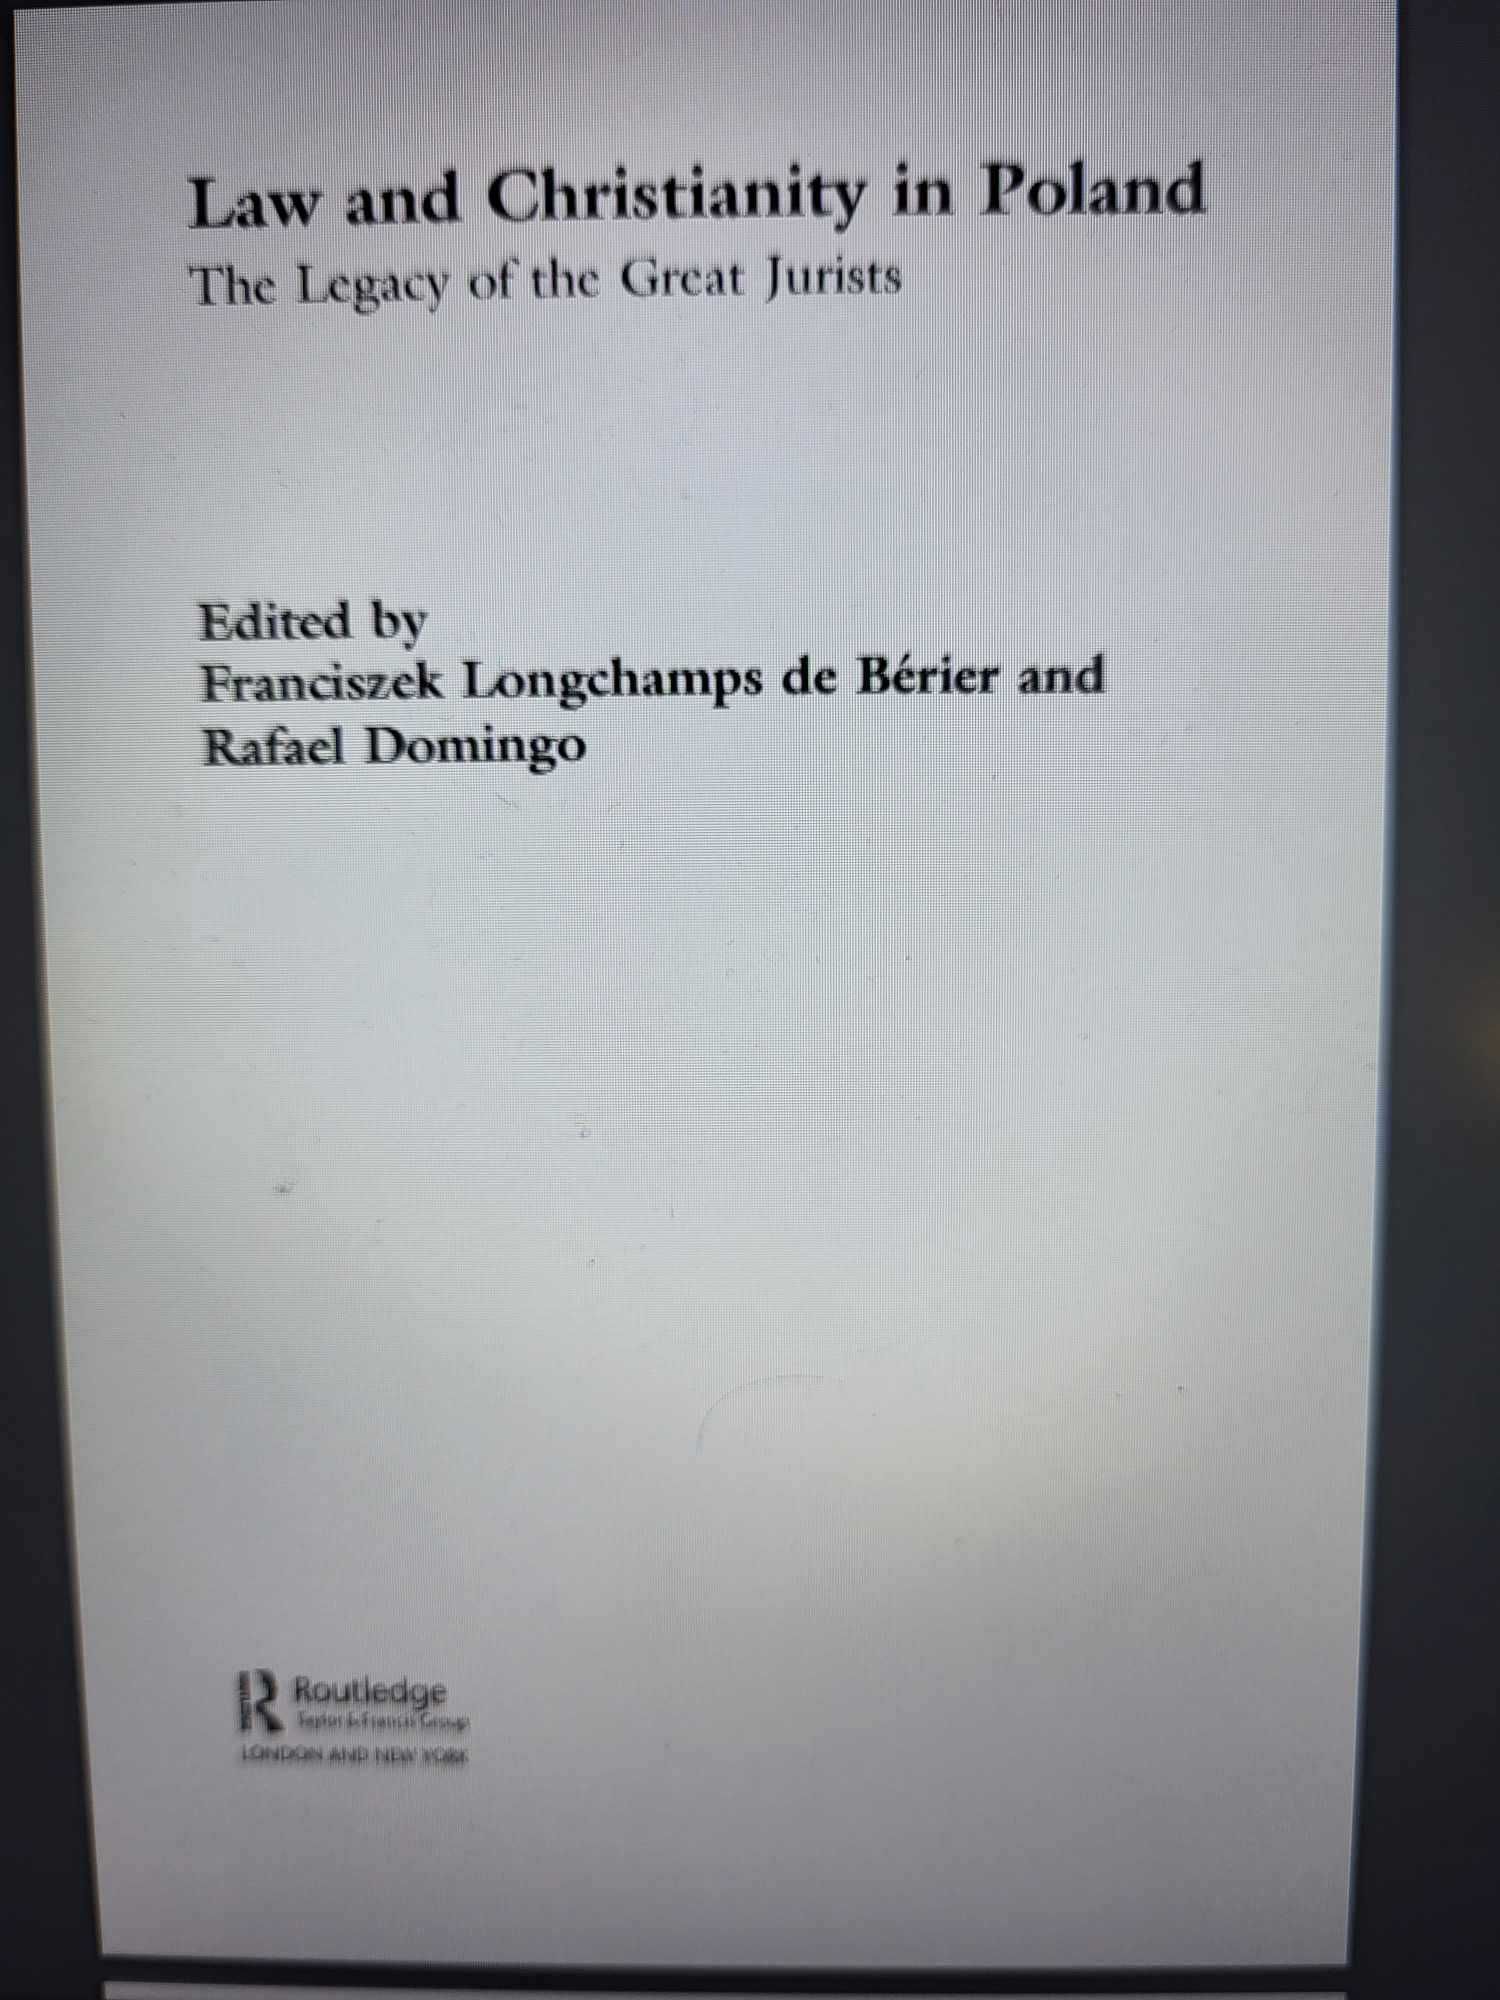 Law and Christianity in Poland: The Legacy of the Great Jurists, PDF